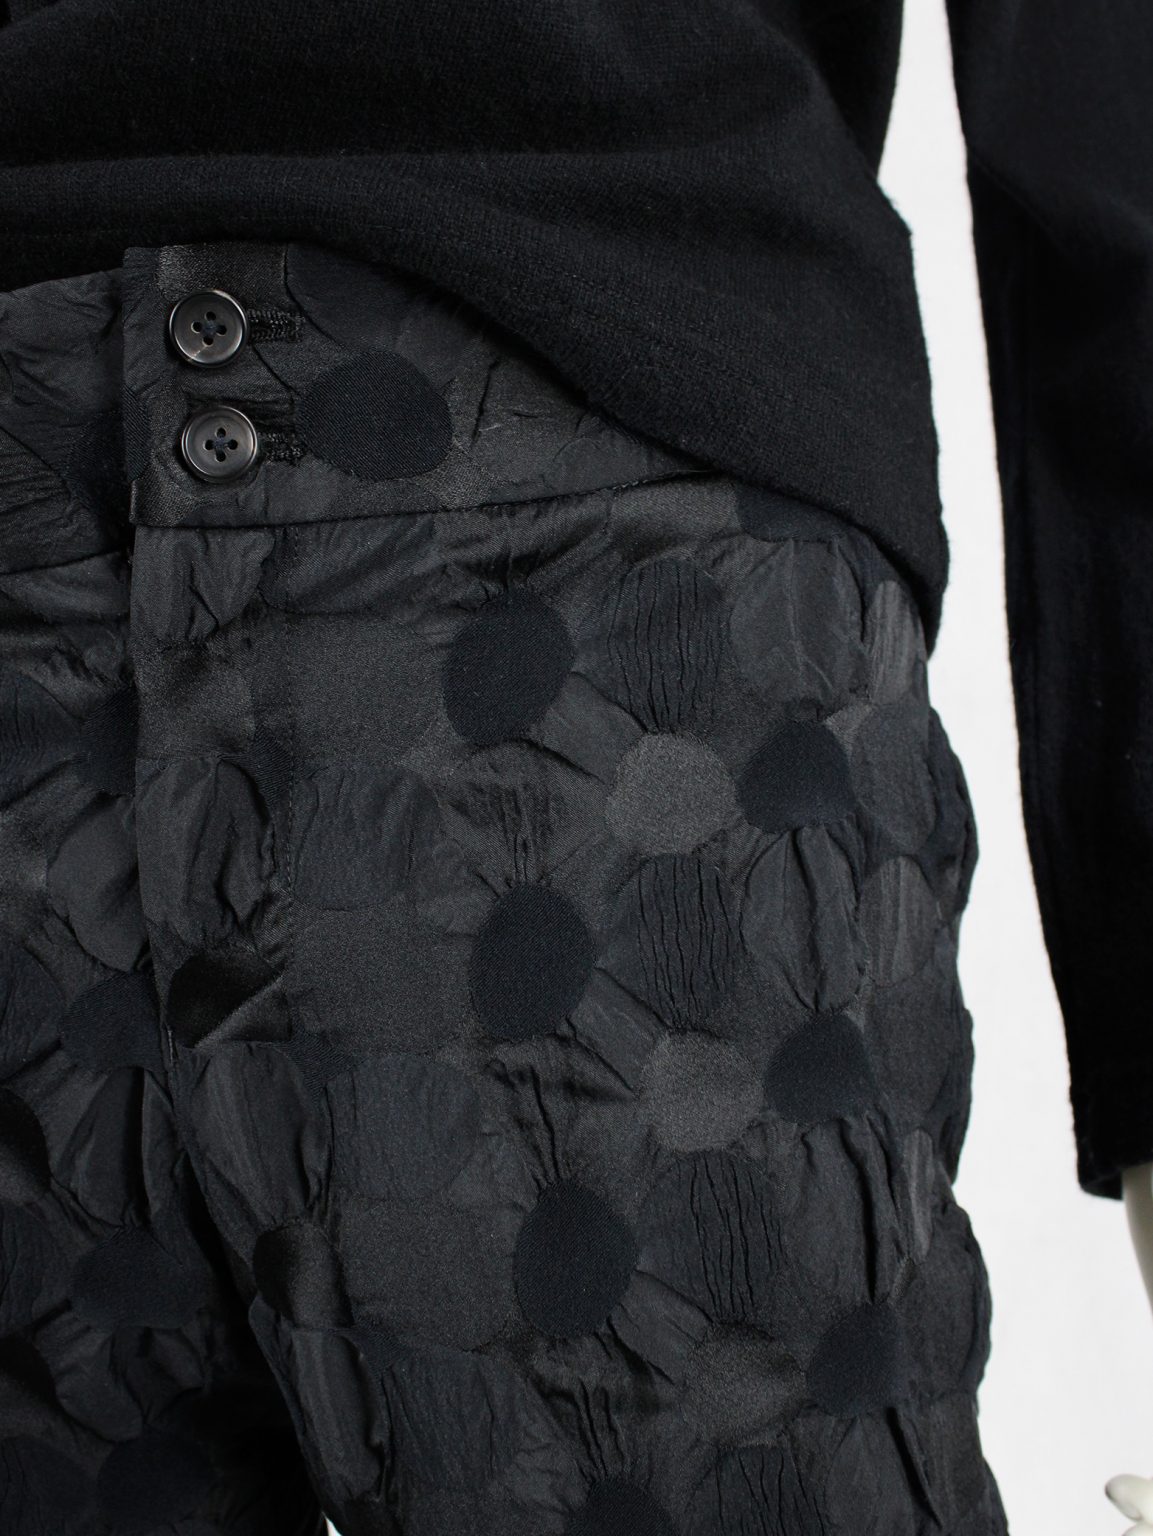 Issey Miyake black trousers with the fabric manipulated into different circles